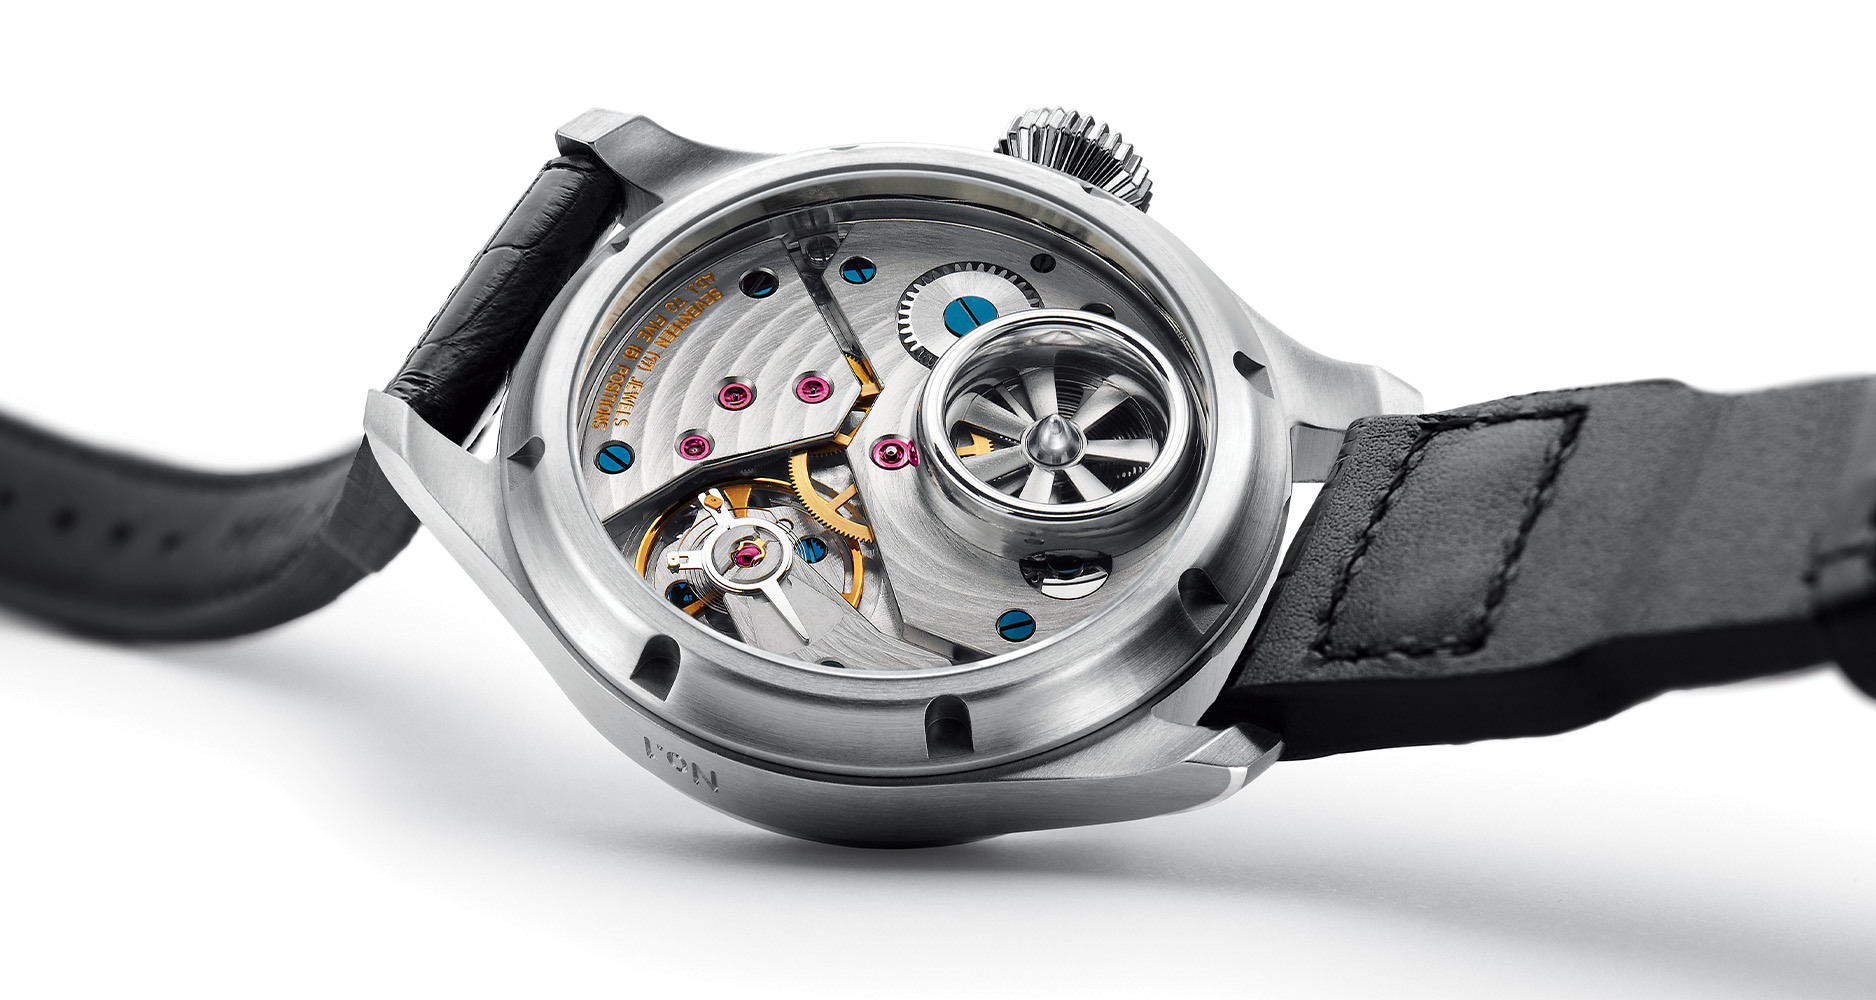 The hand-wound IWC Calibre 82905 can be viewed from the caseback of the Big Pilot's Watch 43 Tourbillon Markus Bühler.